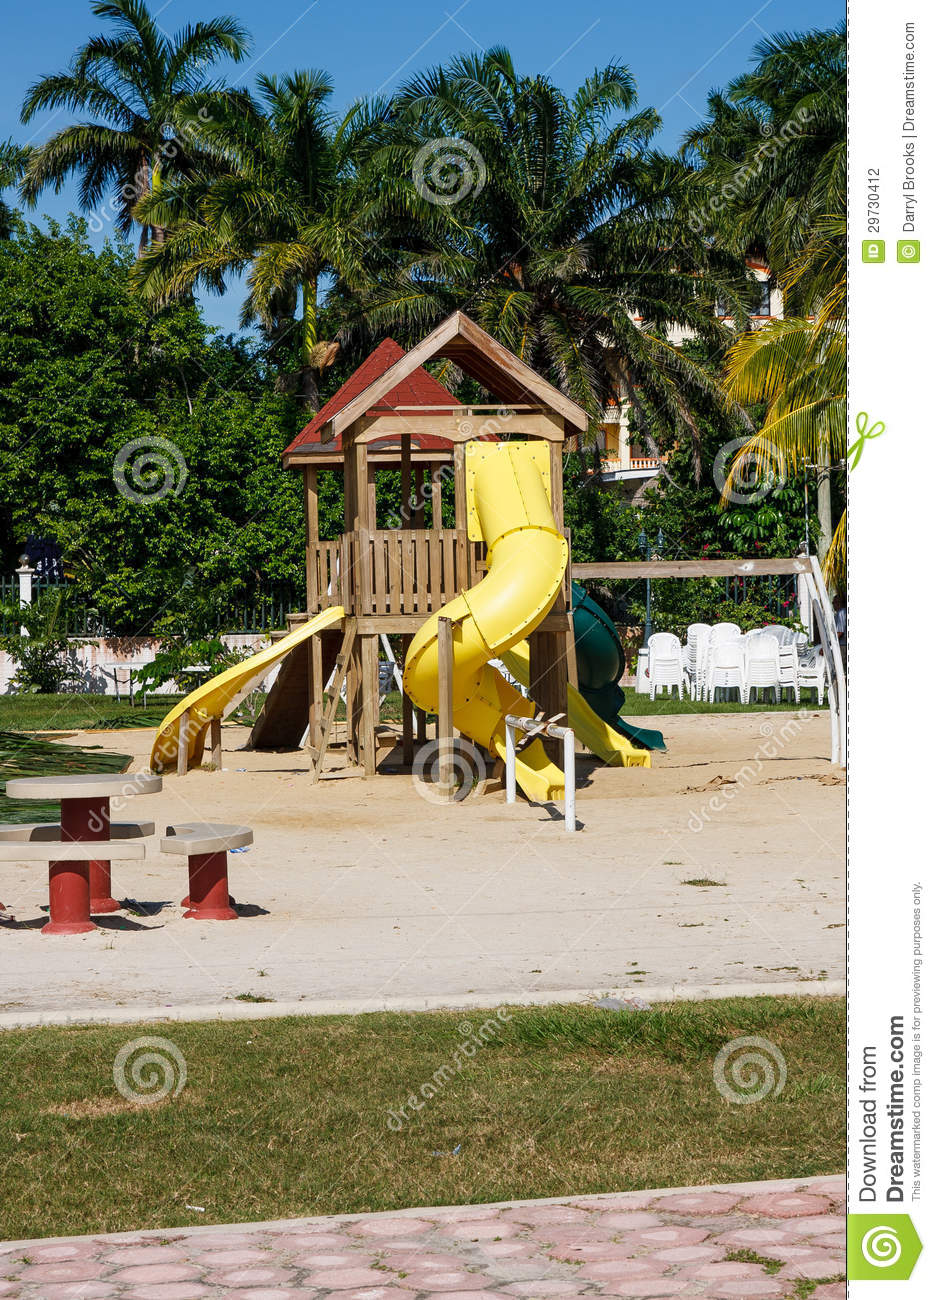 Yellow Plastic Sliding Boards On Wood Playground In A Tropical Park